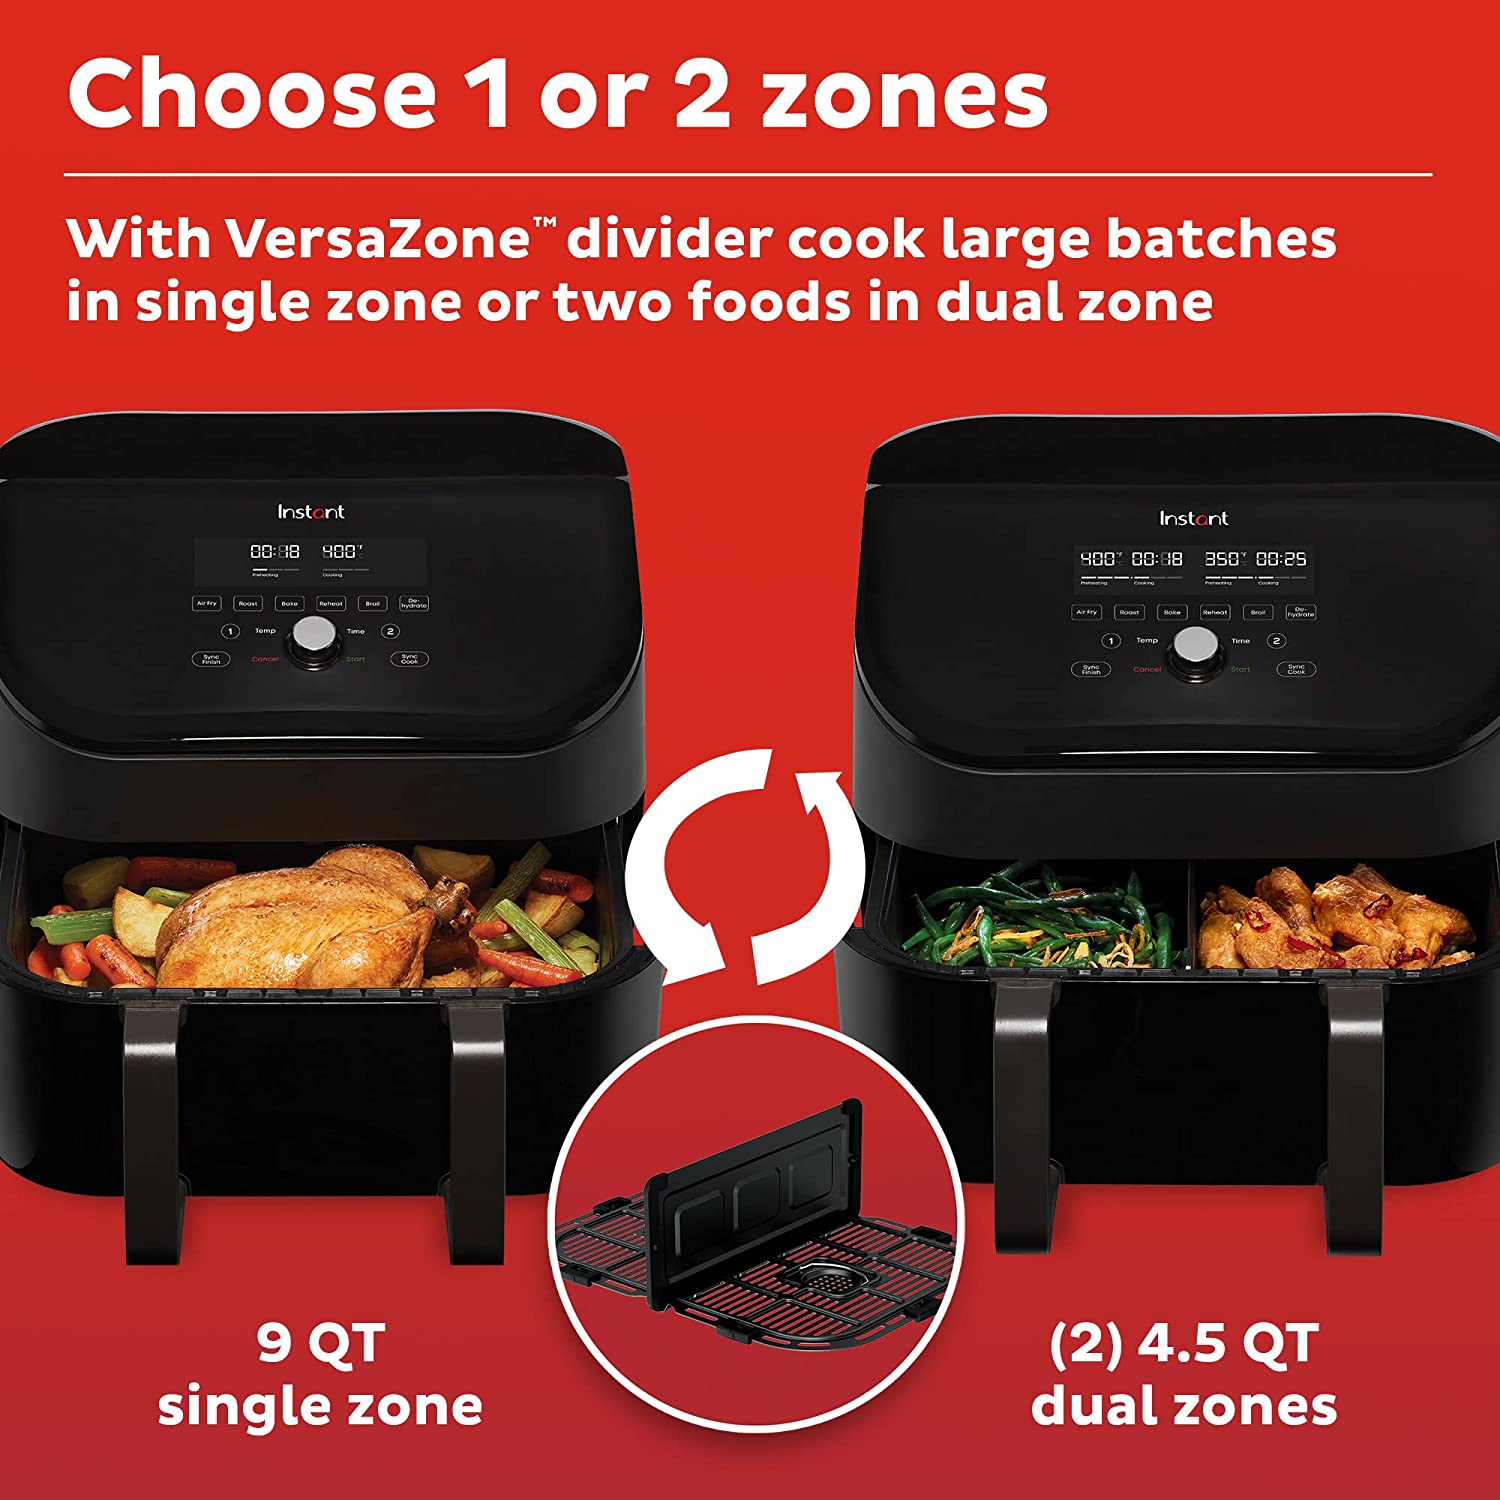 https://discounttoday.net/wp-content/uploads/2023/07/Instant-Vortex-9-Quart-VersaZone-8-in-1-XL-Air-Fryer-with-Dual-Basket-Option-From-the-Makers-of-Instant-Pot-2.jpg